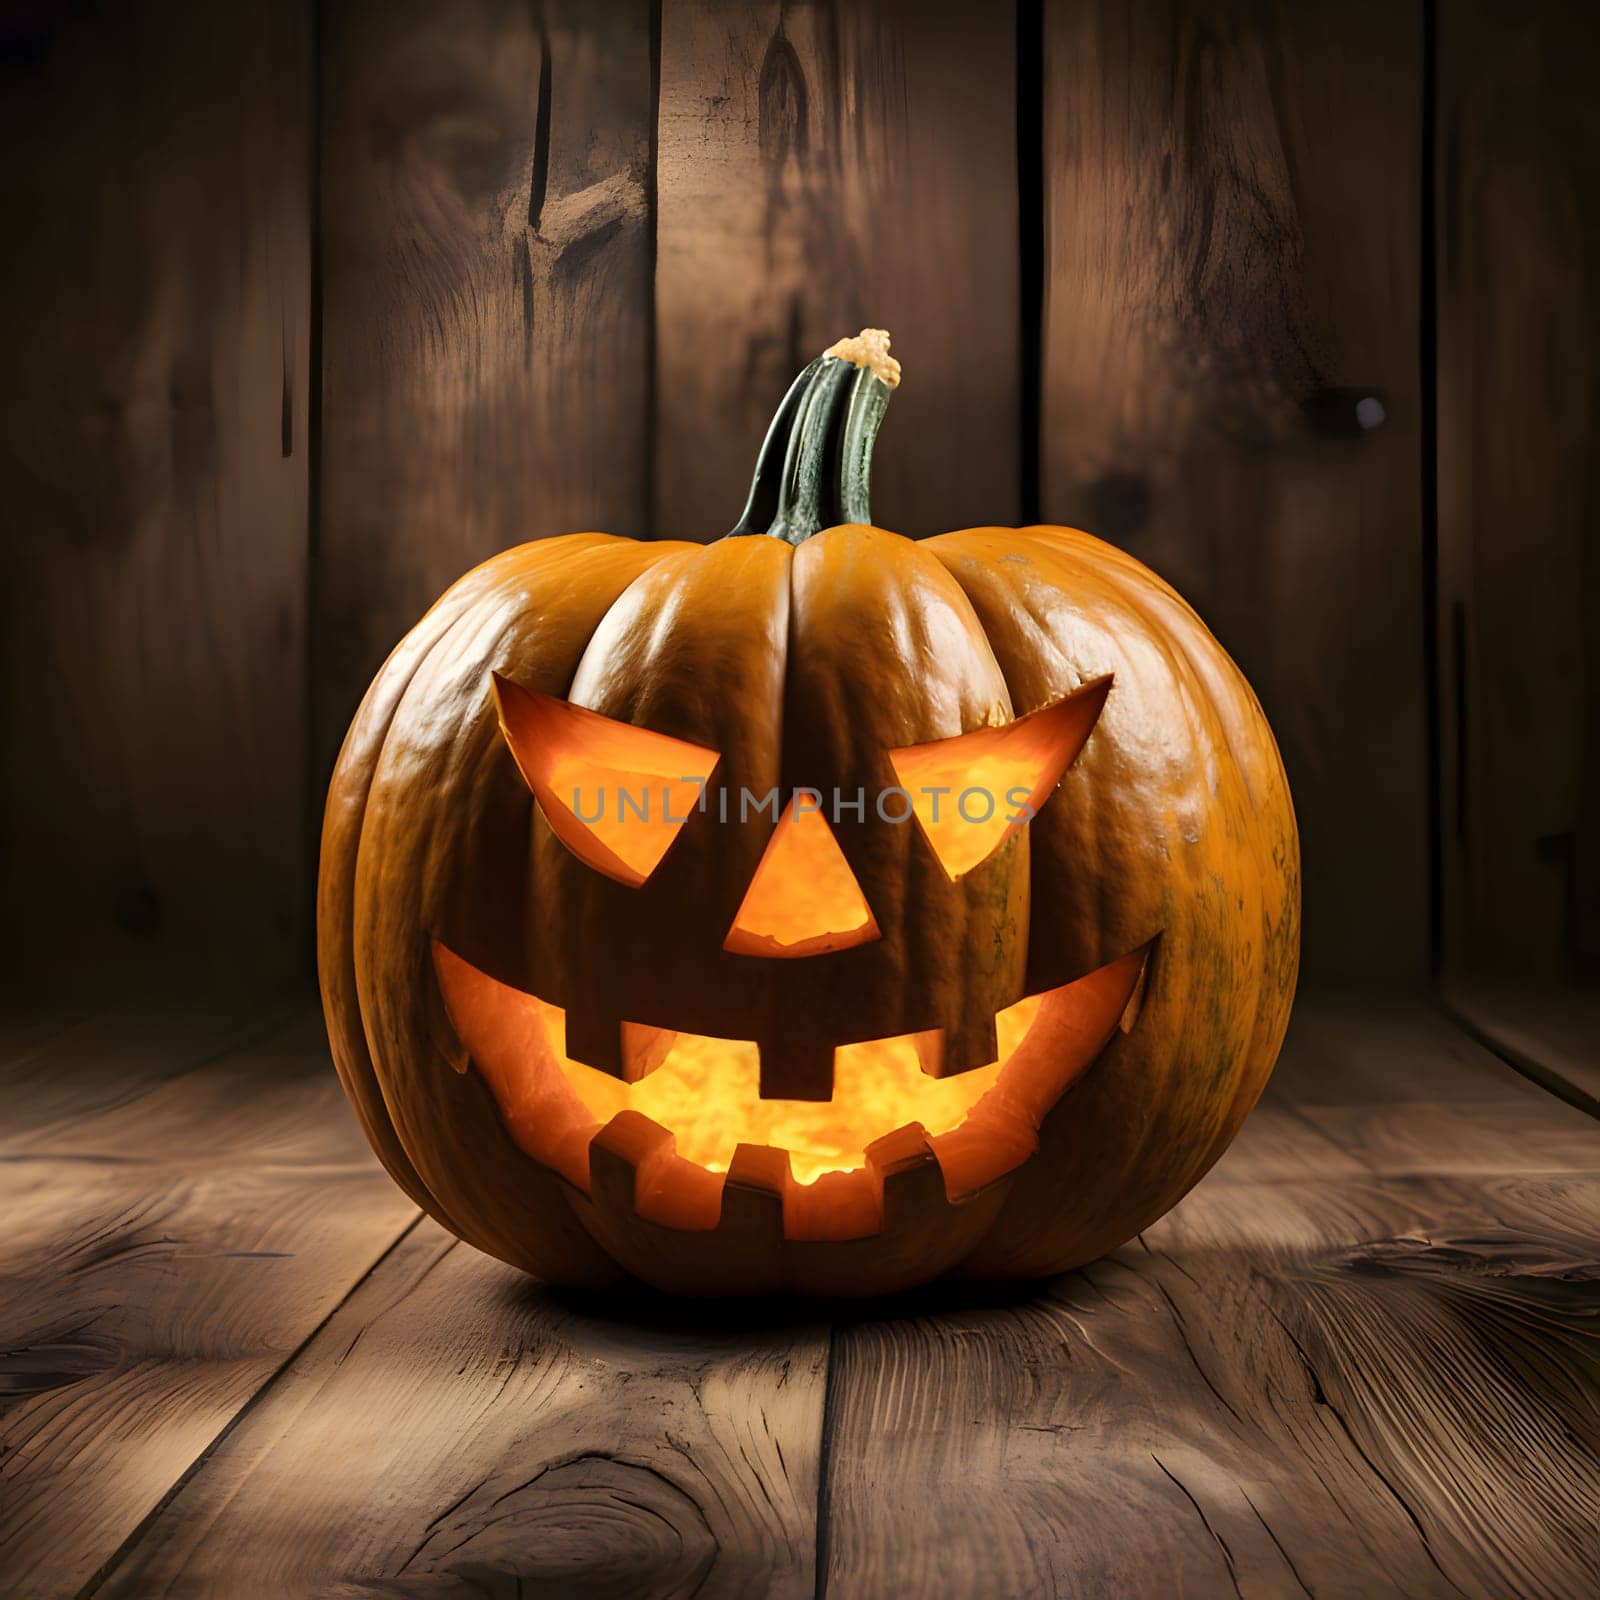 Glowing jack-o-lantern pumpkin on the background of wooden boards, a Halloween image. by ThemesS